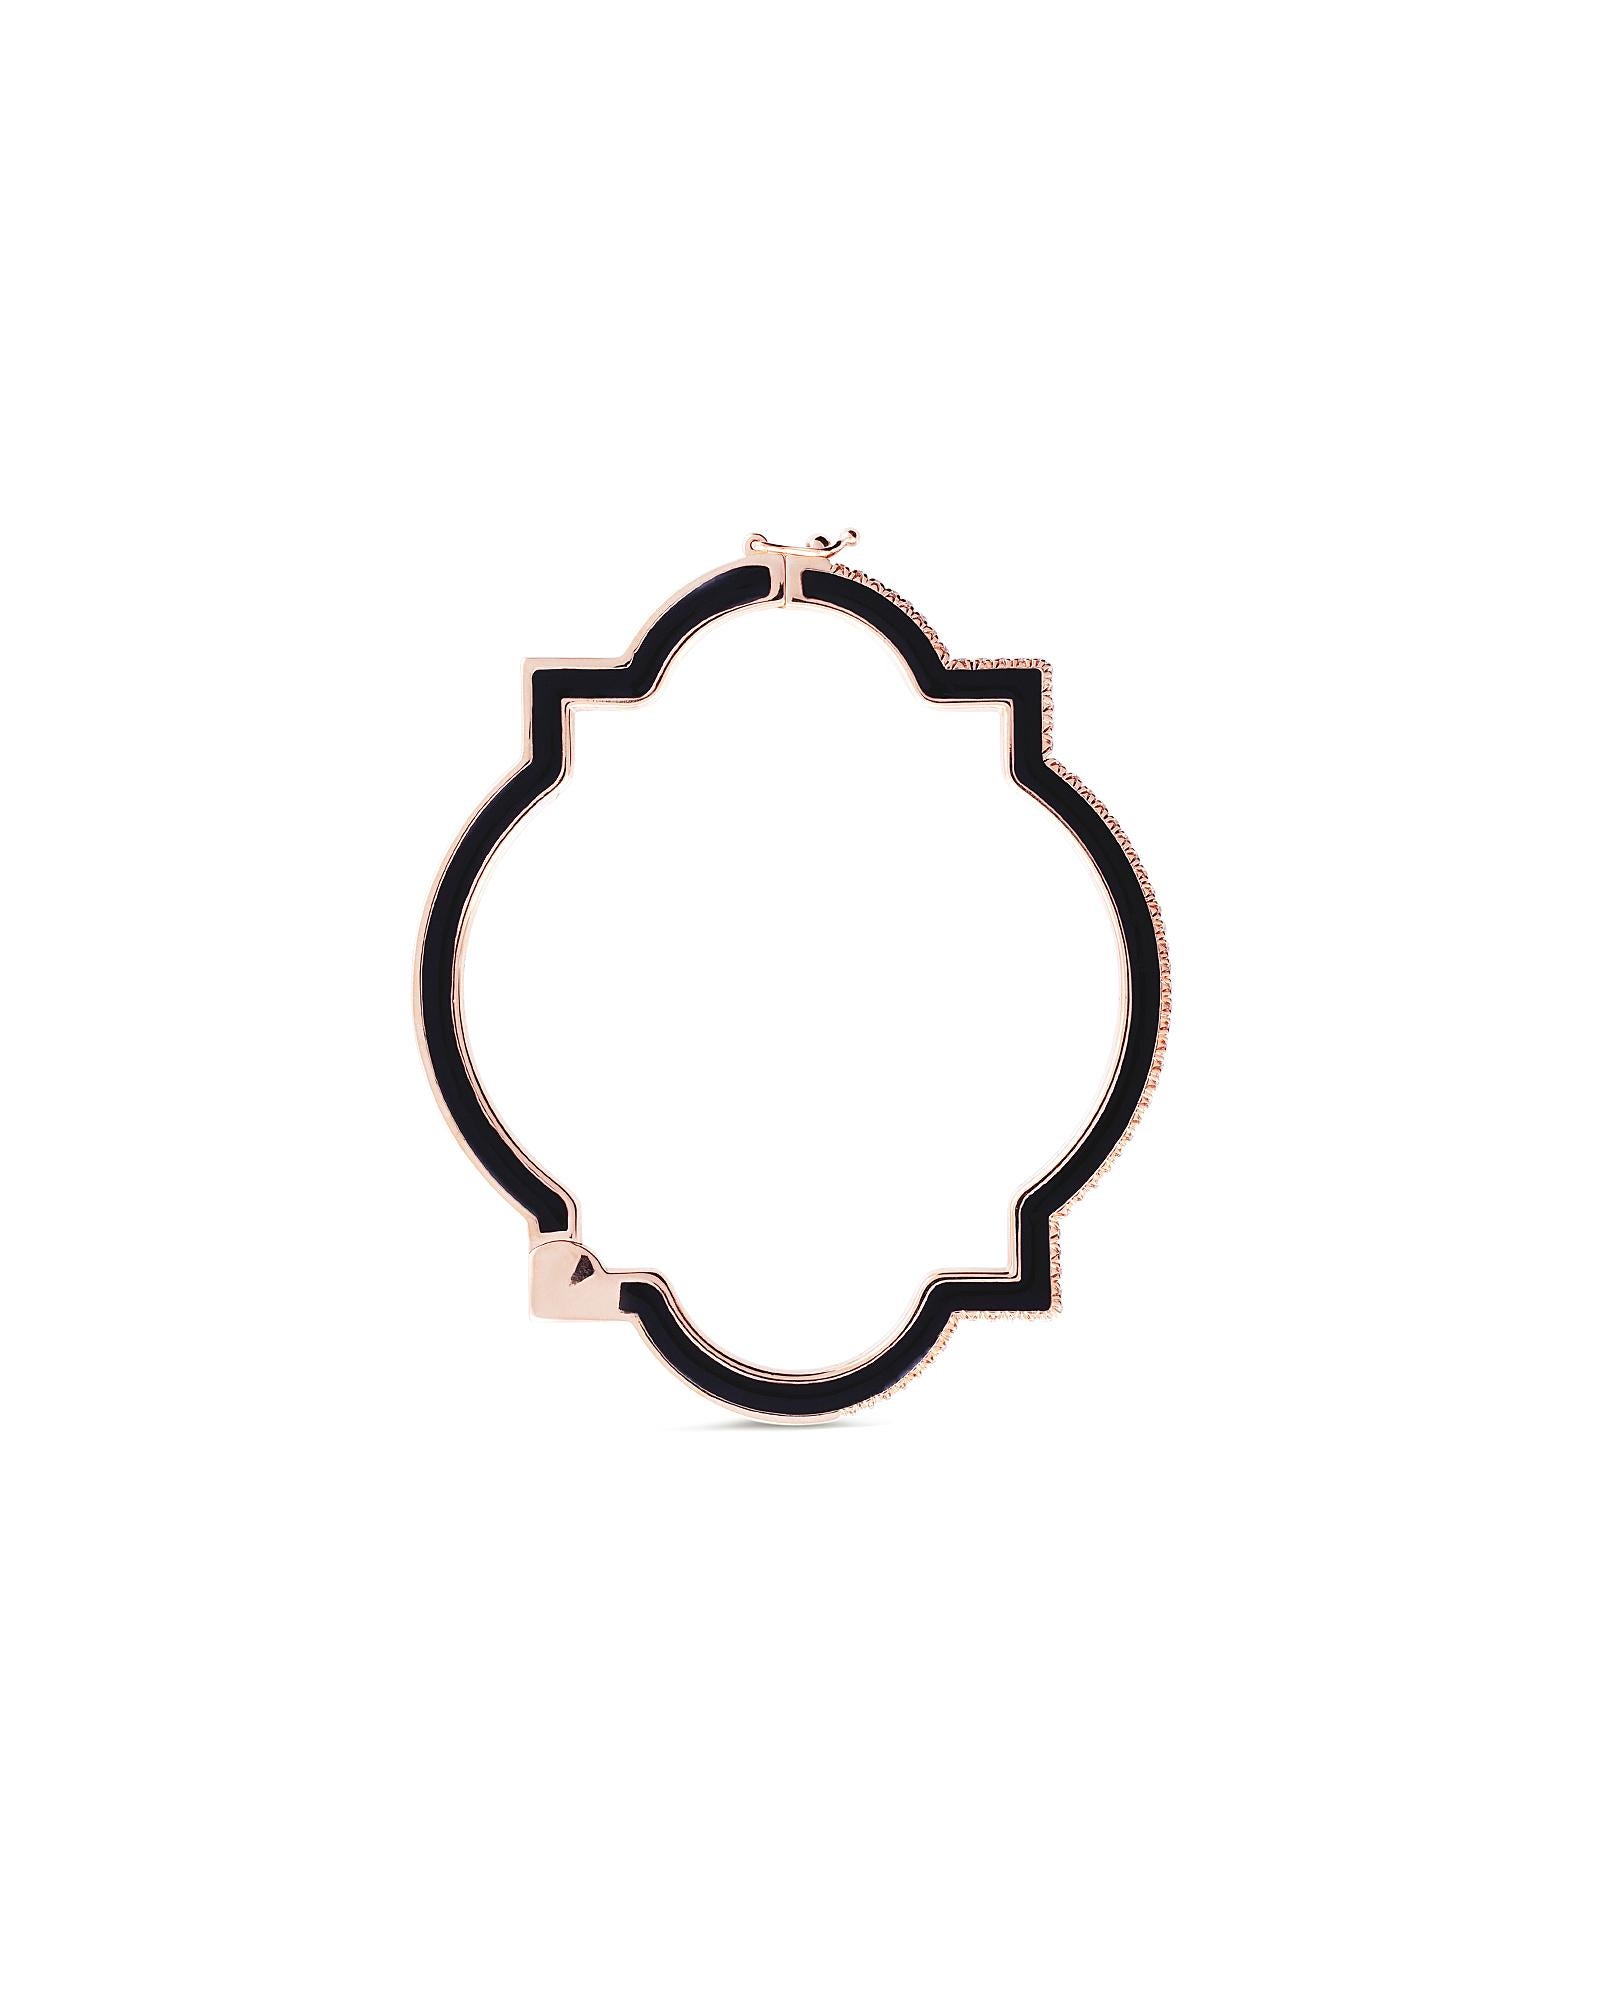 The rigid Anime bracelet, made of rose gold, is characterized by an elegant contemporary style. The unconventional symbol is distinguished by its geometric shape, consisting of black enamel and a row of diamonds cleverly set. The luxurious jewel,